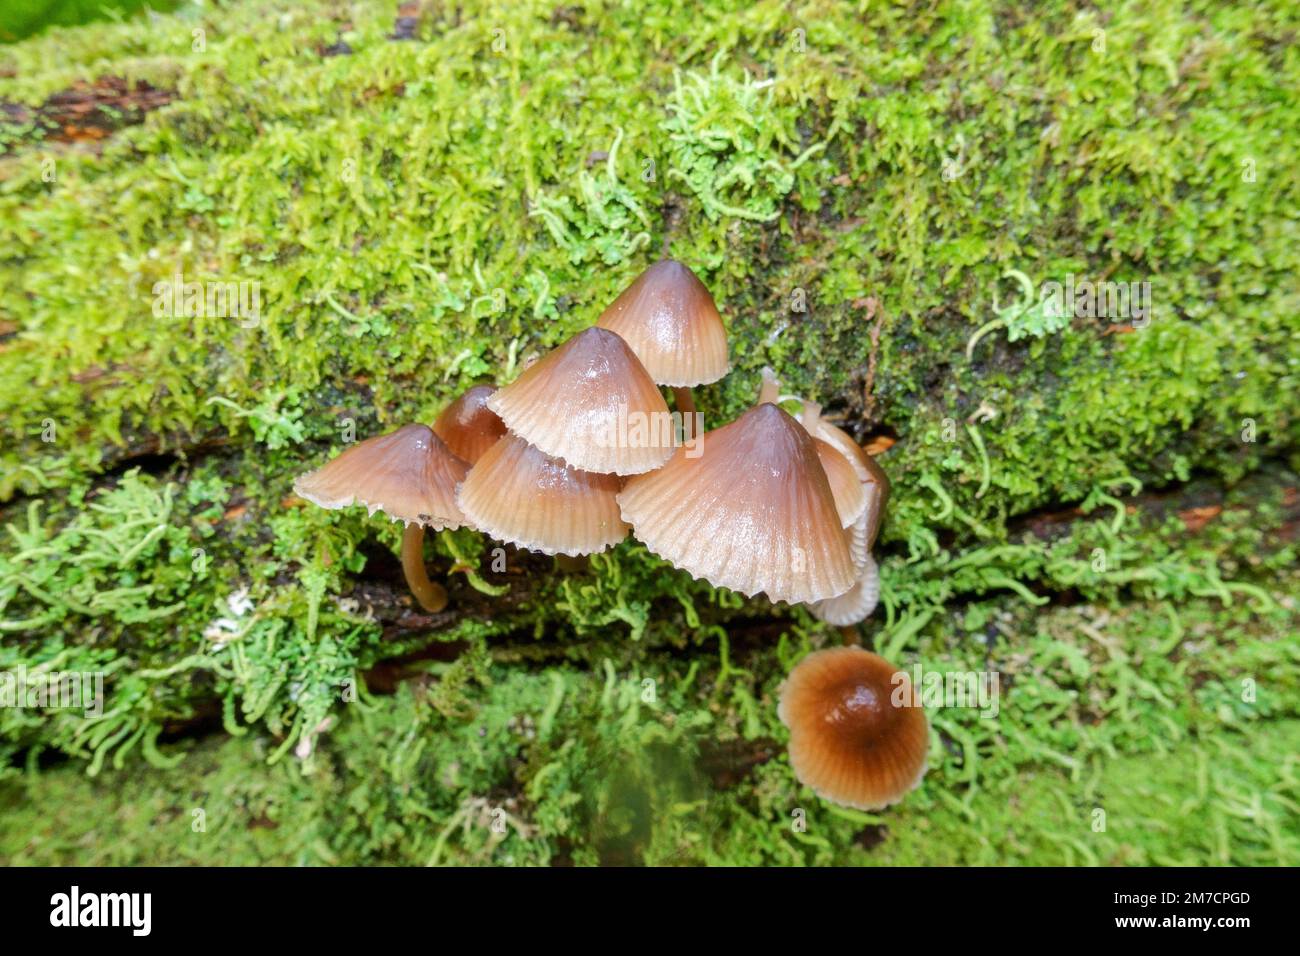 Clustered bonnet (Mycena inclinata) growing on decaying moss covered tree stump. Herefordshire England UK. December 2022 Stock Photo